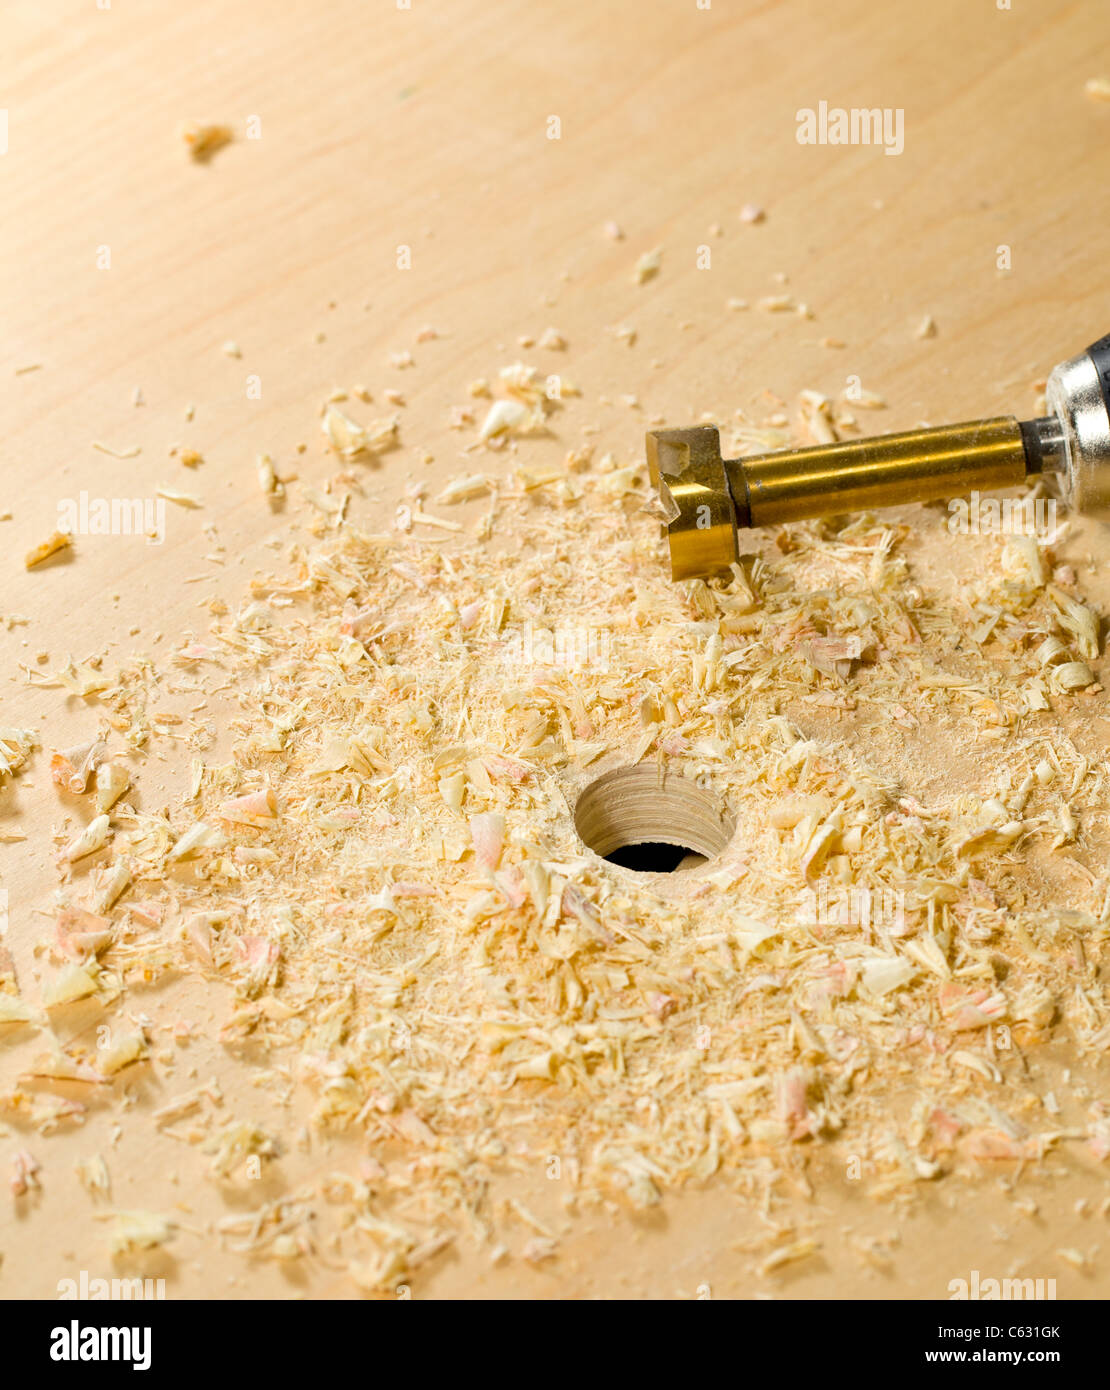 Drilling a large hole in a piece of plywood with a drill and bit Stock Photo